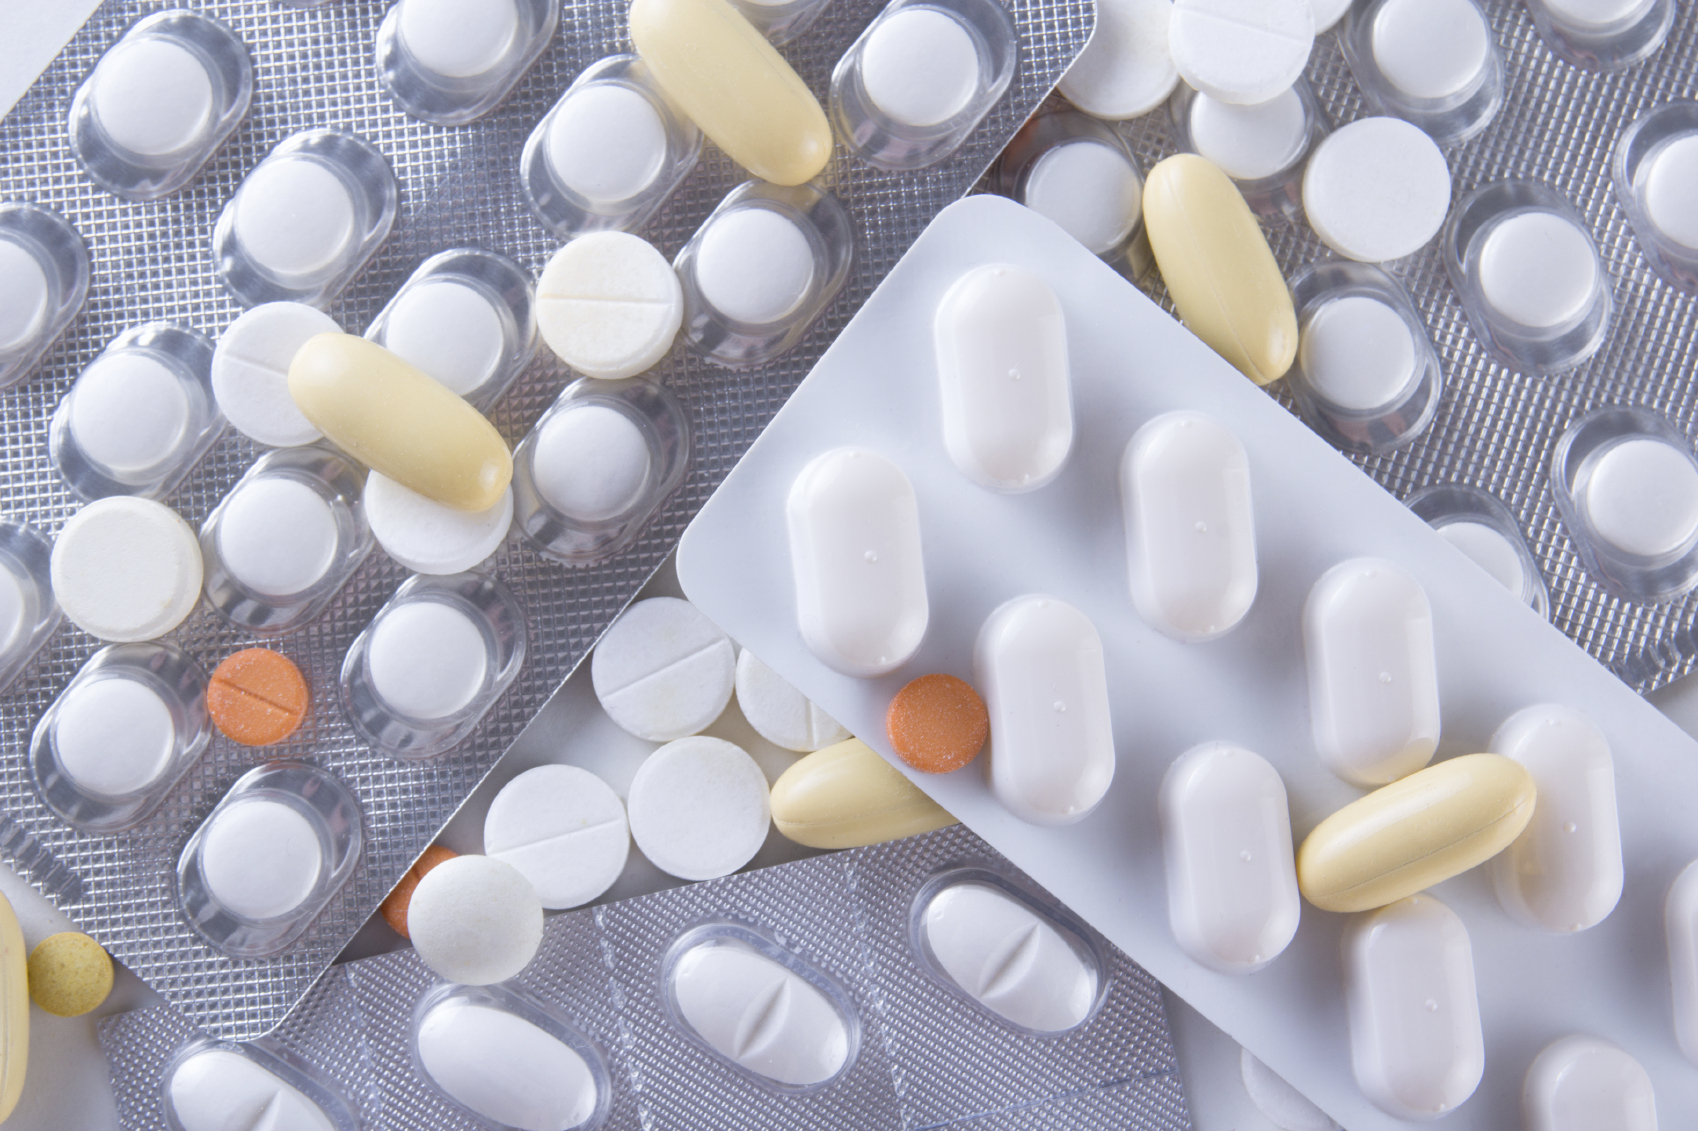 You know certain antihistamines can put your brain in danger. But it’s not just prescriptions. These common OTC drugs could be raising your dementia risk by 54%.